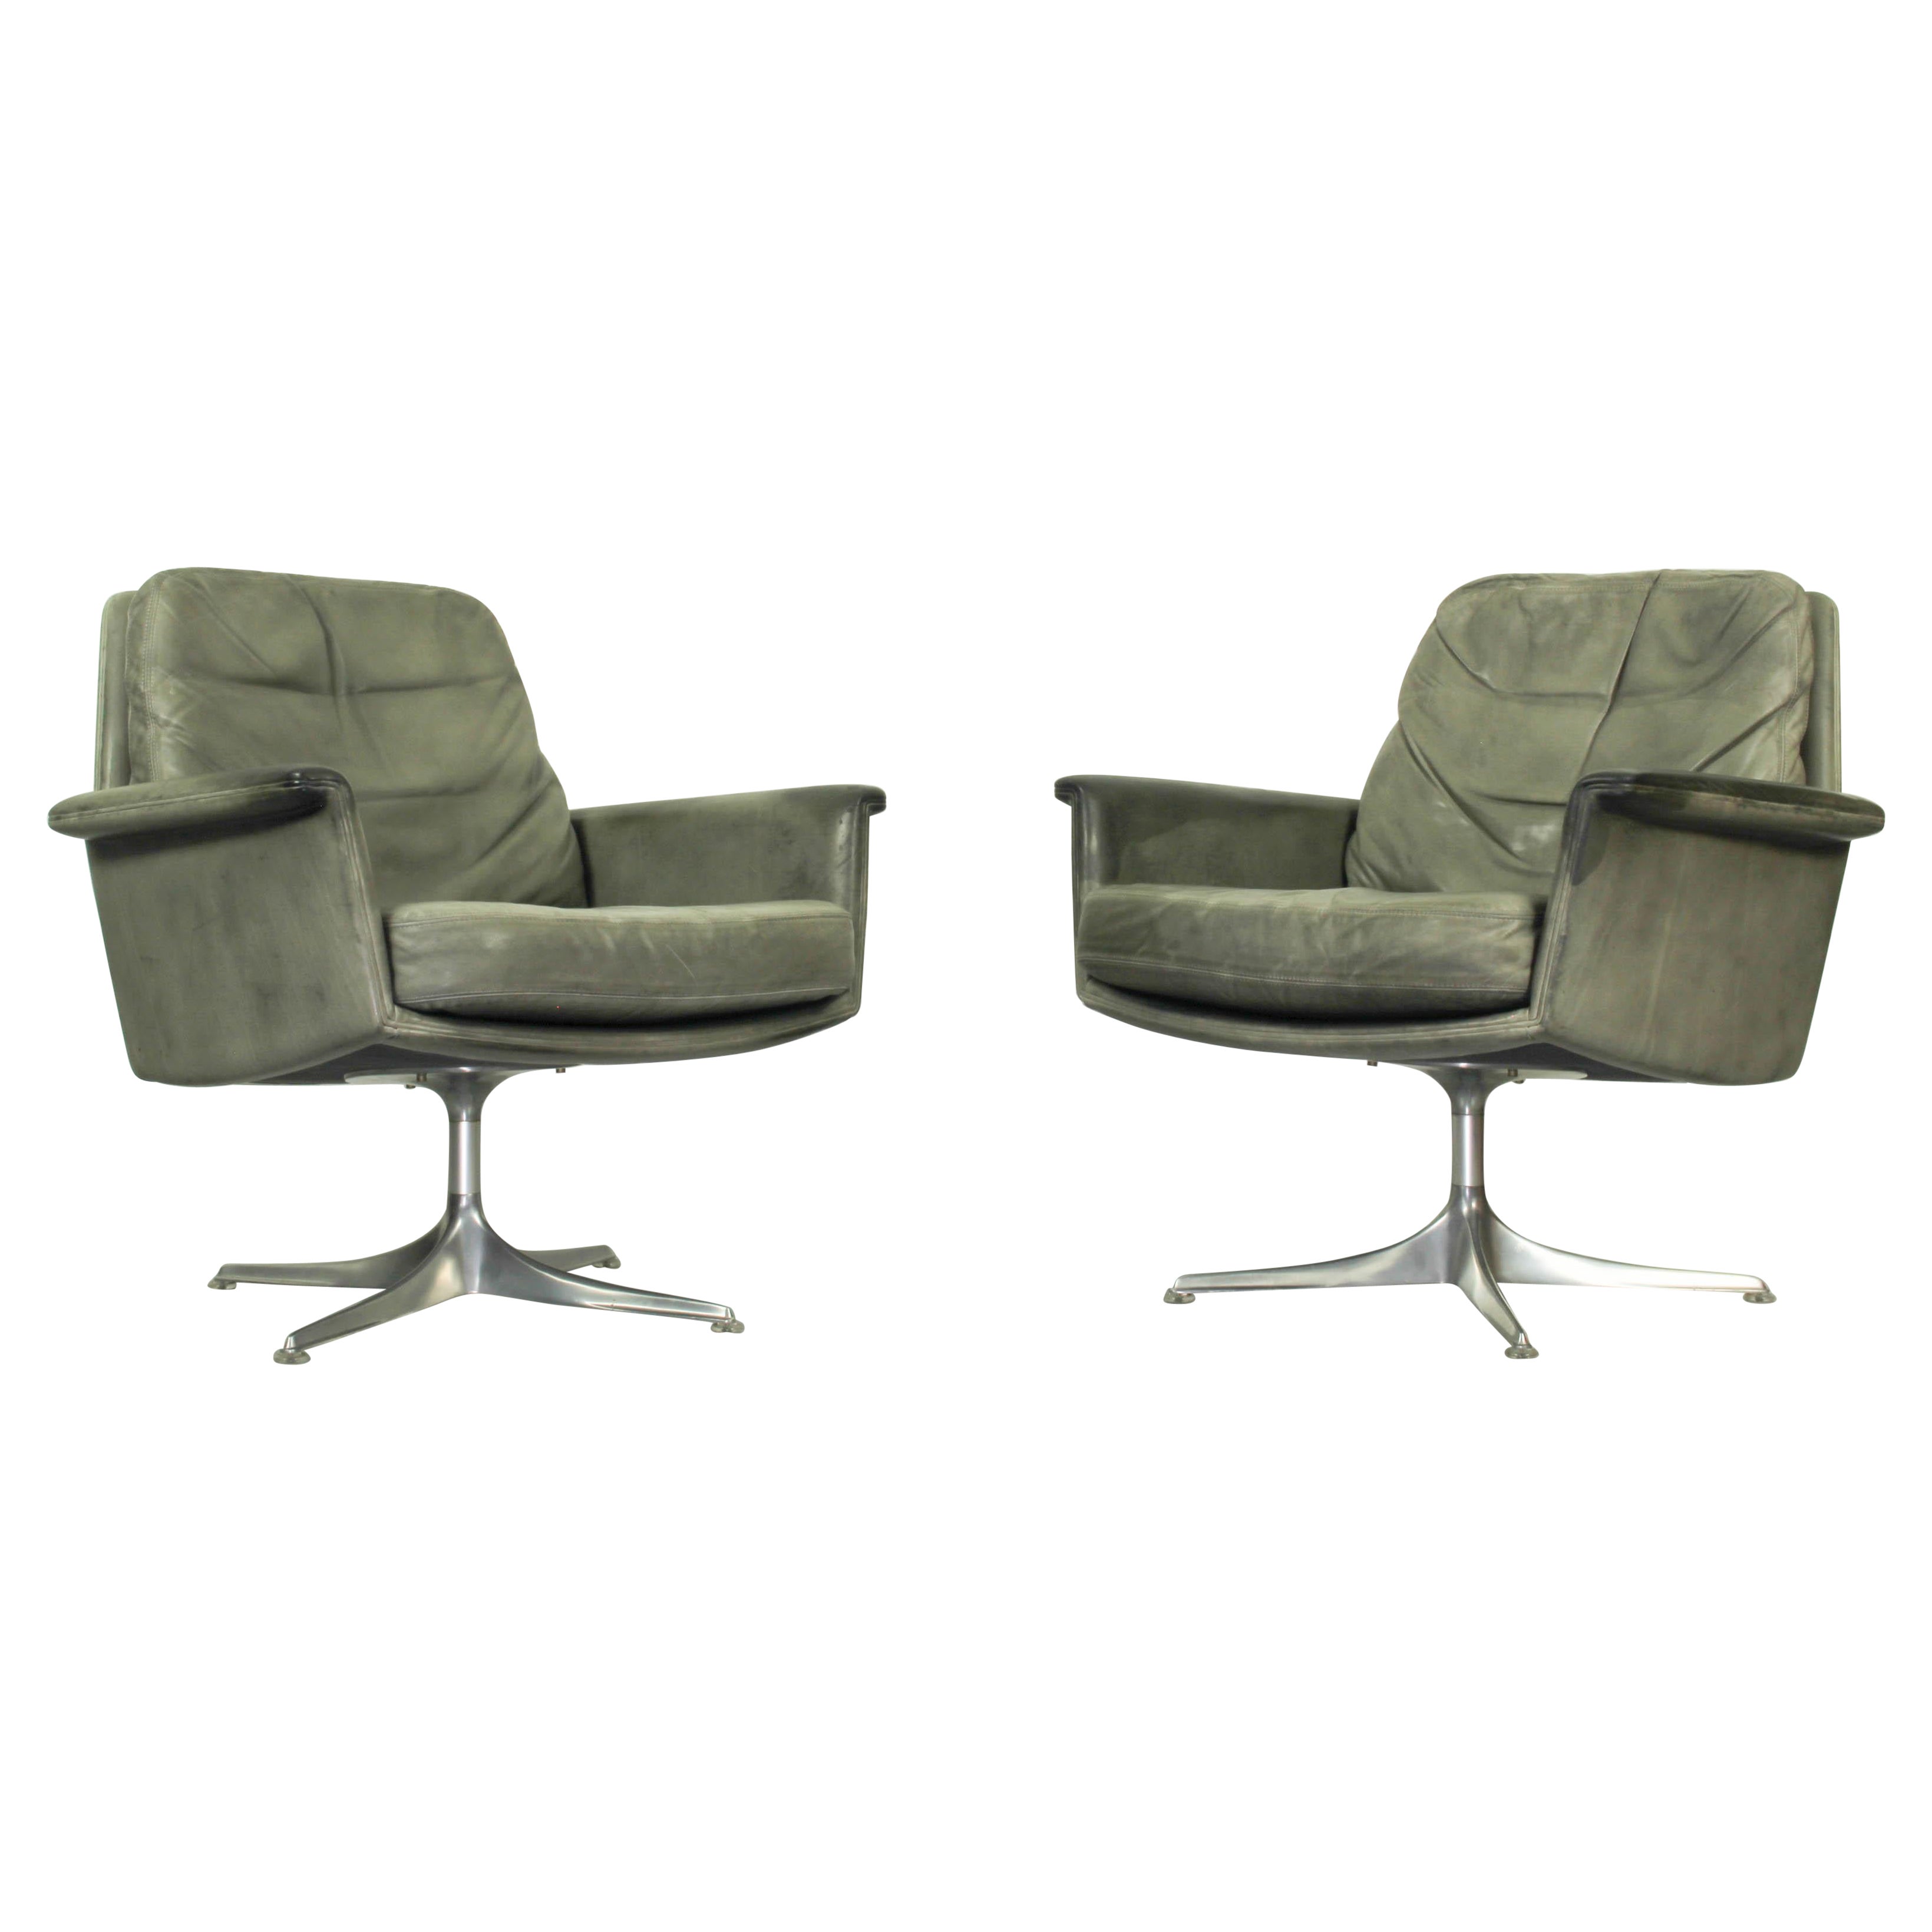 Set of 2 Sedia Swivel Chair by Horst Brüning for Cor, 1960s, Grey Leather